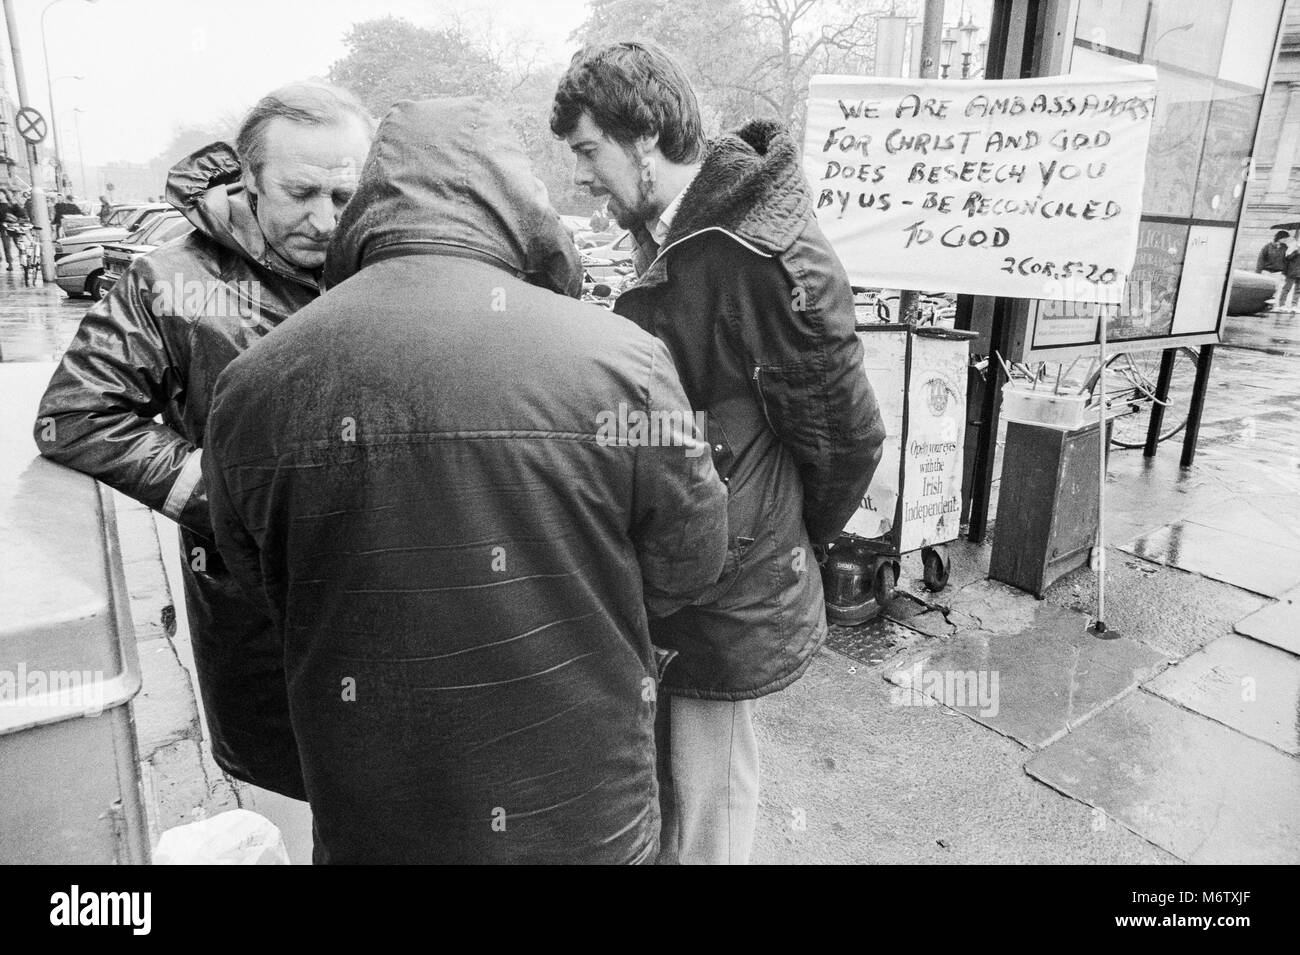 Three men preaching in the street at St Stephens Green, Dublin City Center, Ireland, Archival photograph from April 1988 Stock Photo